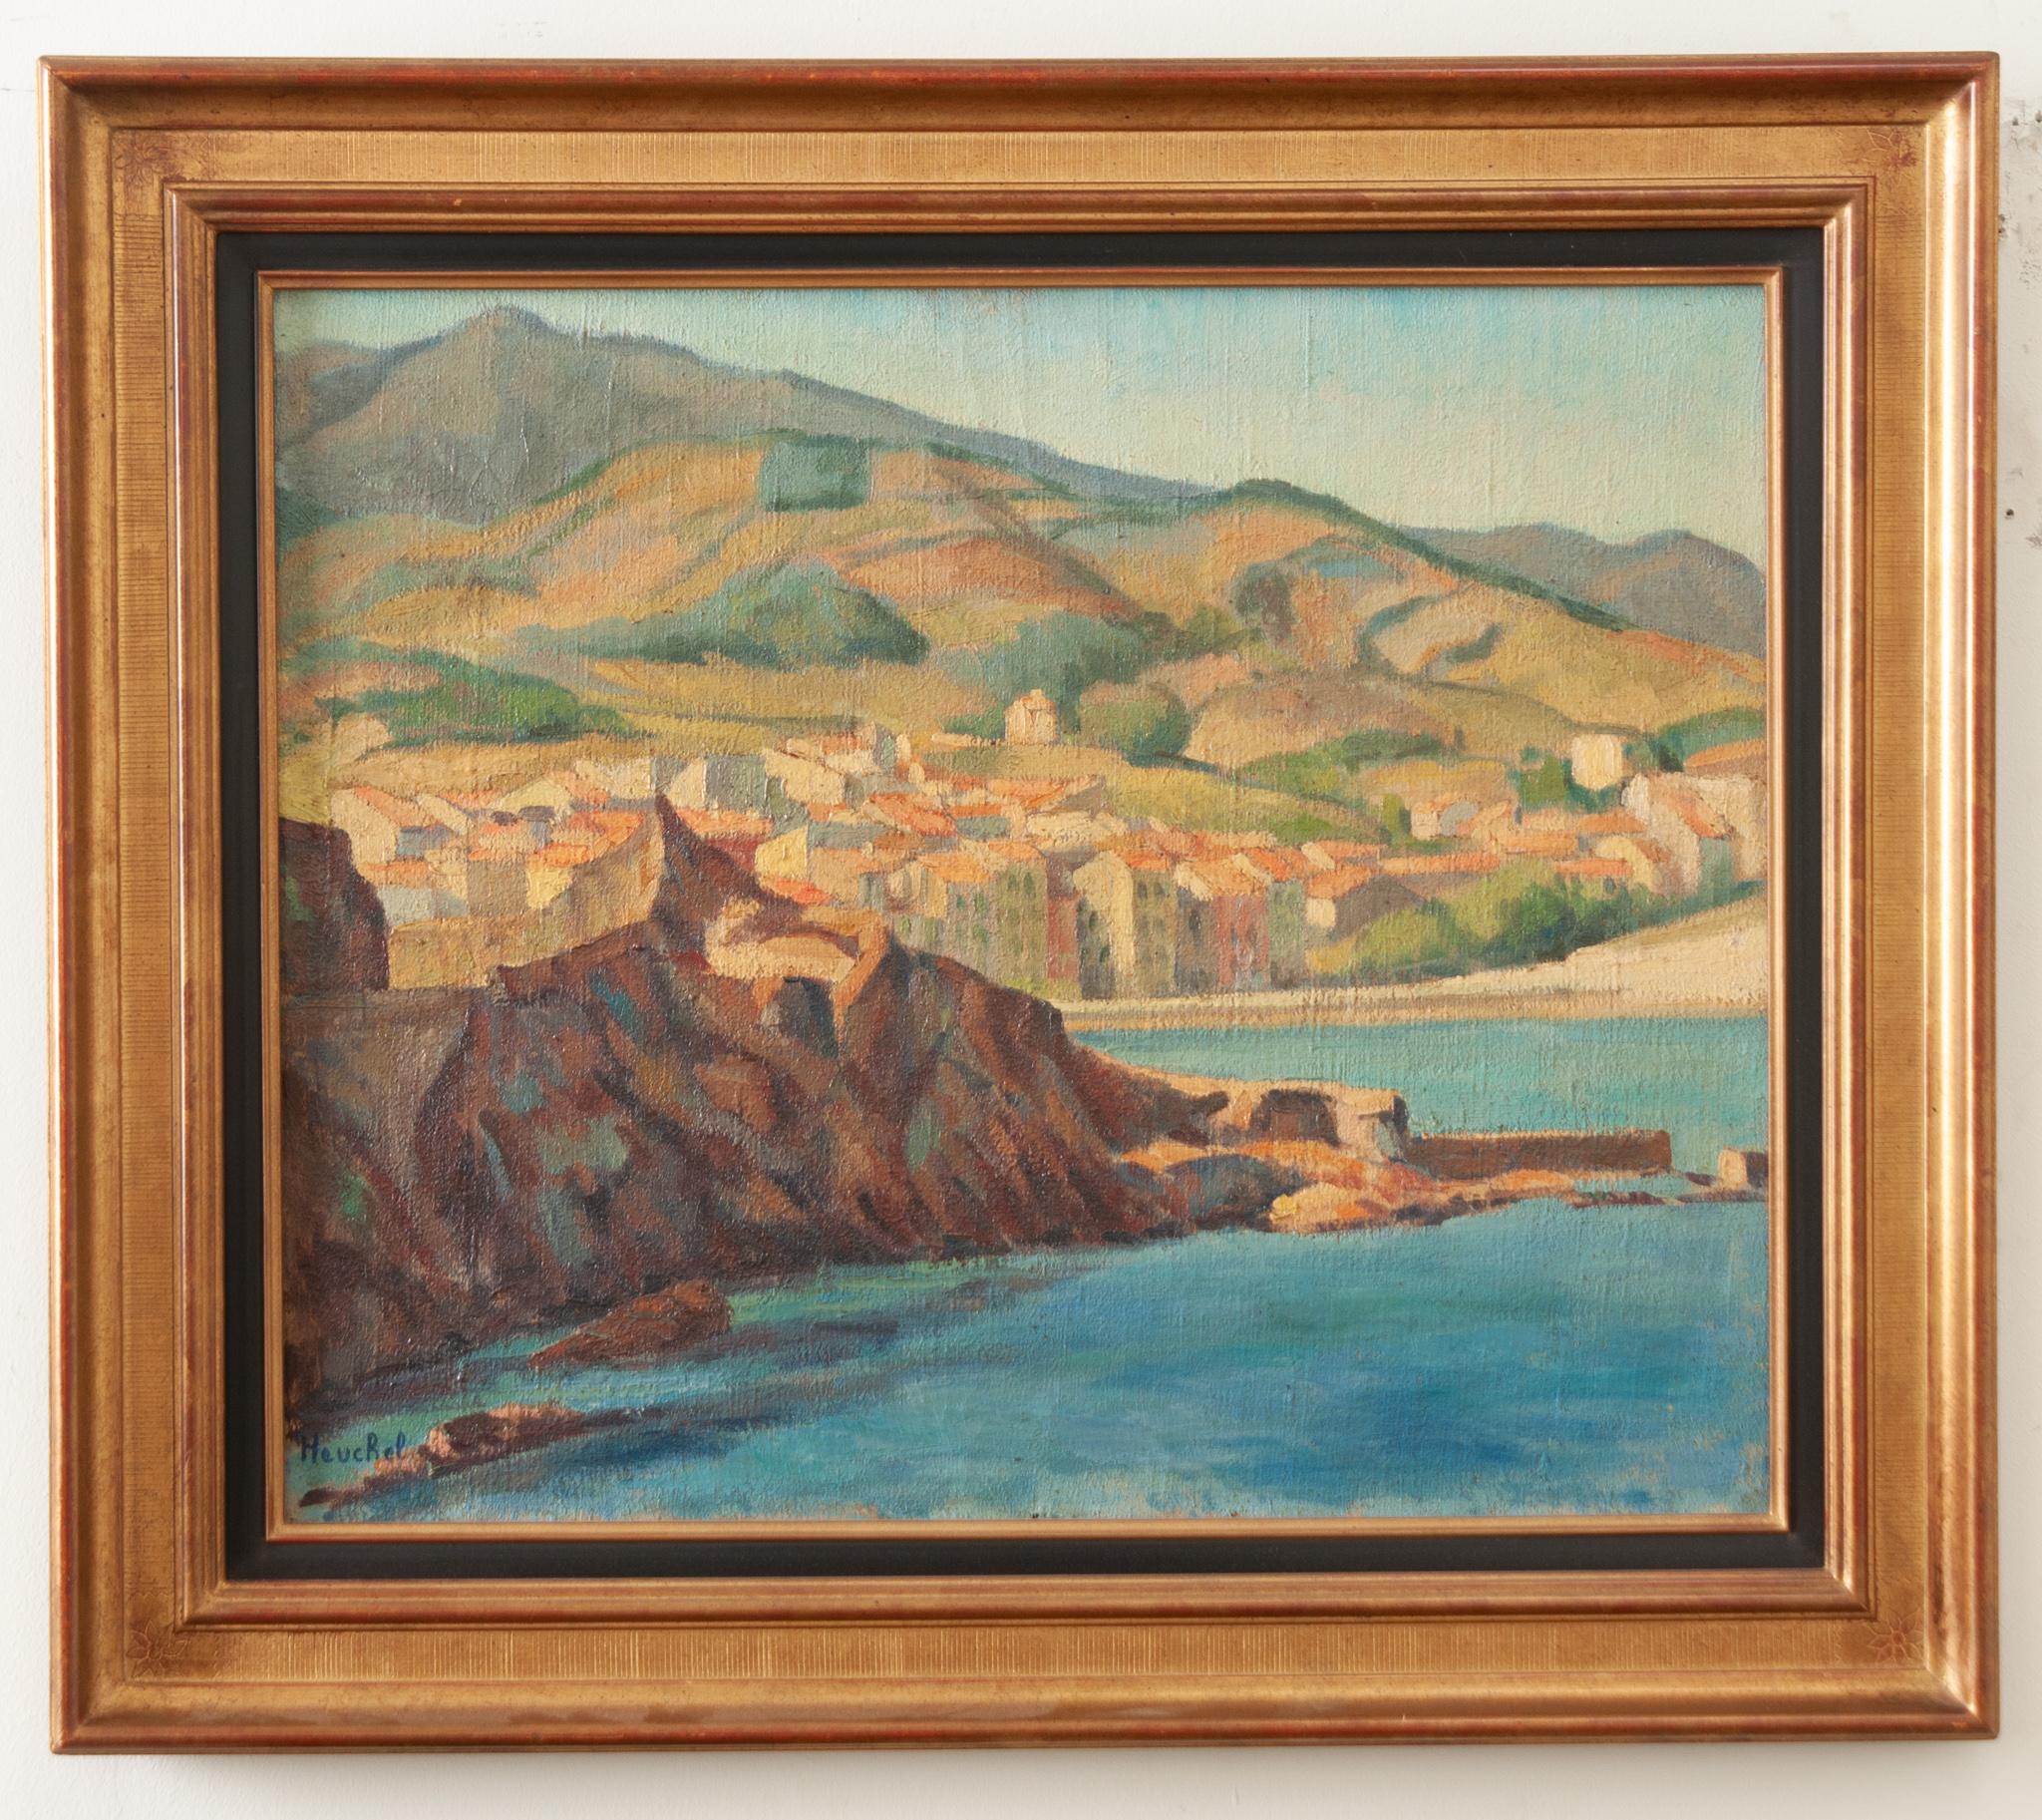 A painting on canvas depicting a coastal cityscape, signed by the artist, “Heuchel”. This painting is beautifully painted with a vibrant color palette and texture. The gold gilt frame is luminous and has an interior ebonized trim. Fixed with a wire